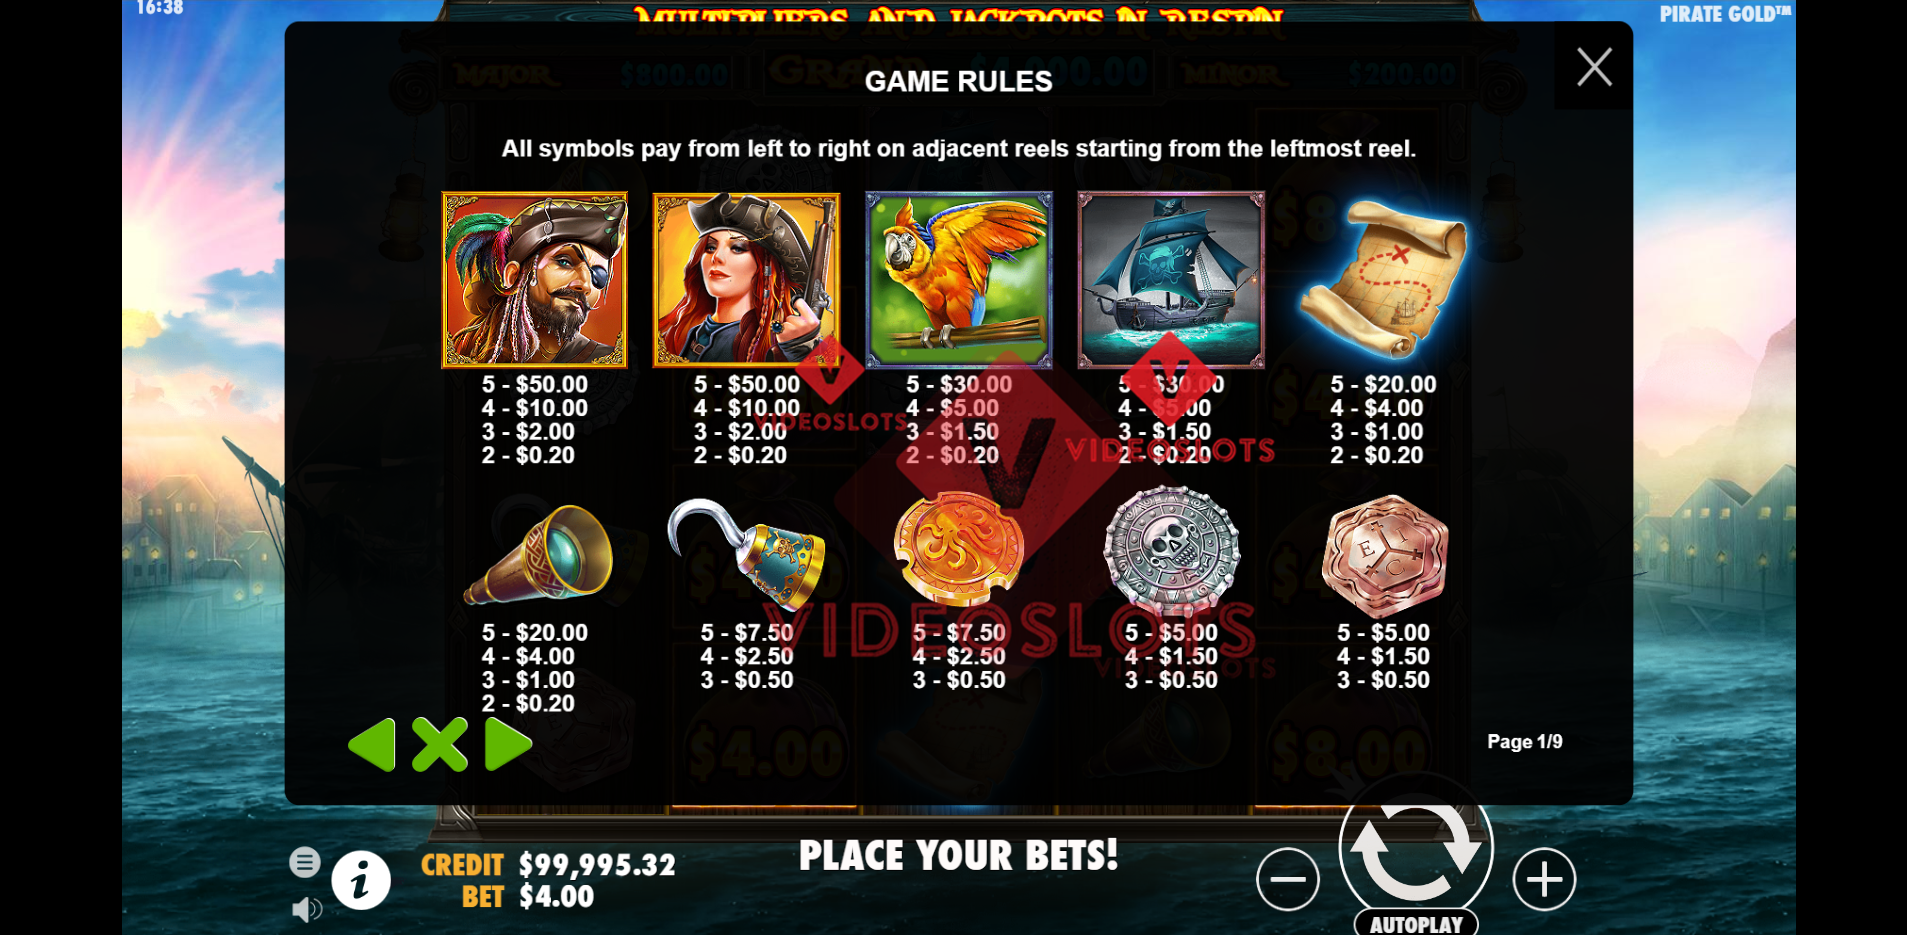 Pay Table for Pirate Gold slot by Pragmatic Play